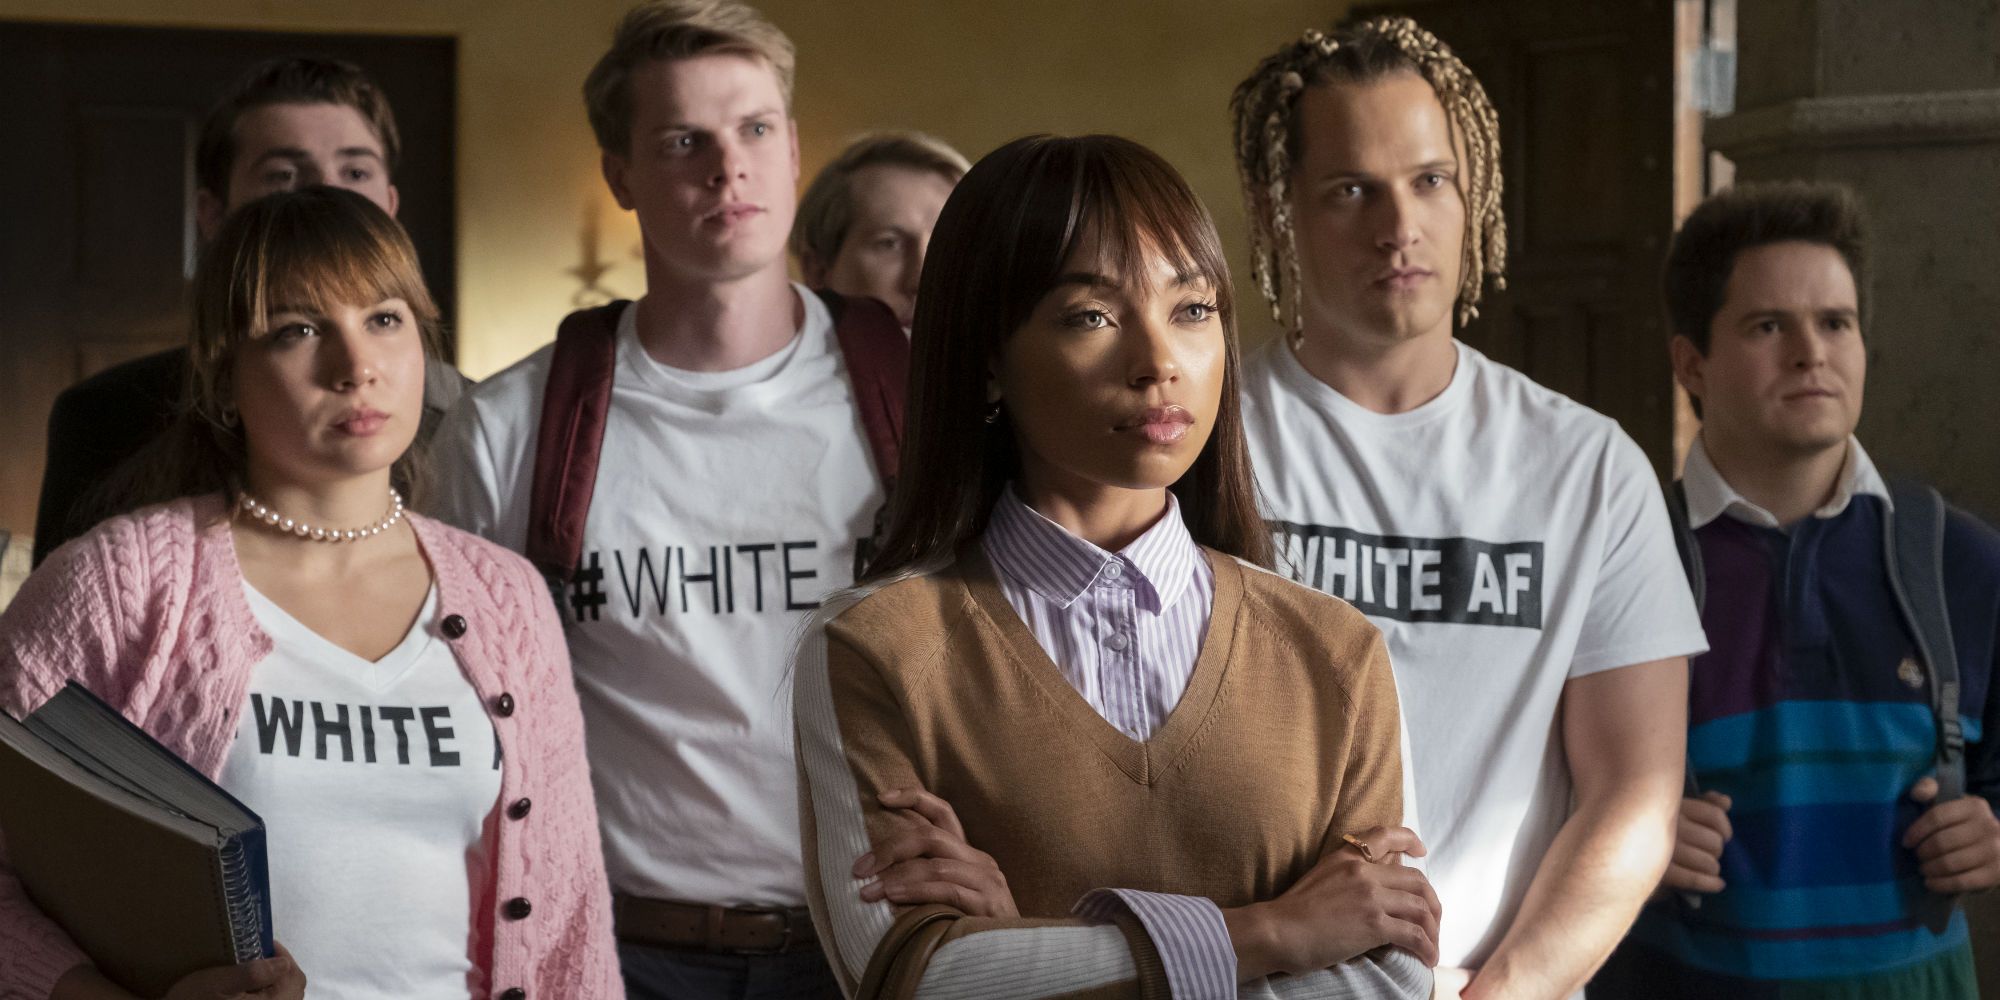 Dear White People Season 3 Ending The Order of X Explained